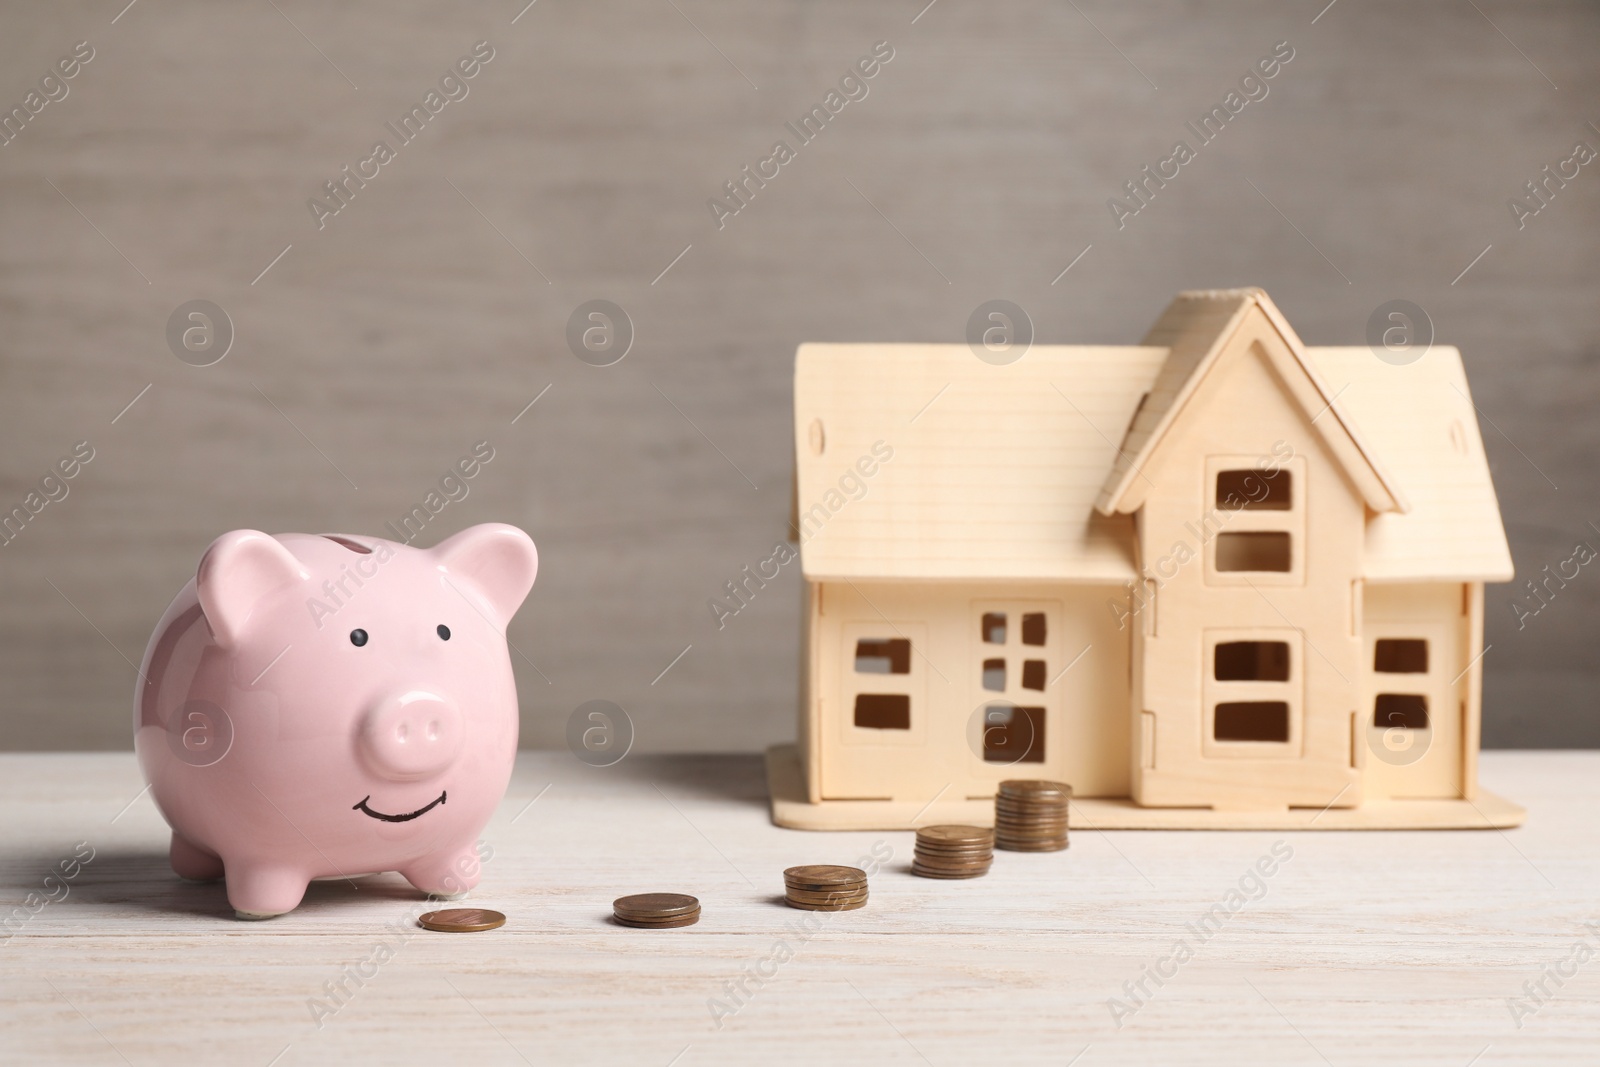 Photo of Piggy bank, little house model and stacks of coins on white wooden table